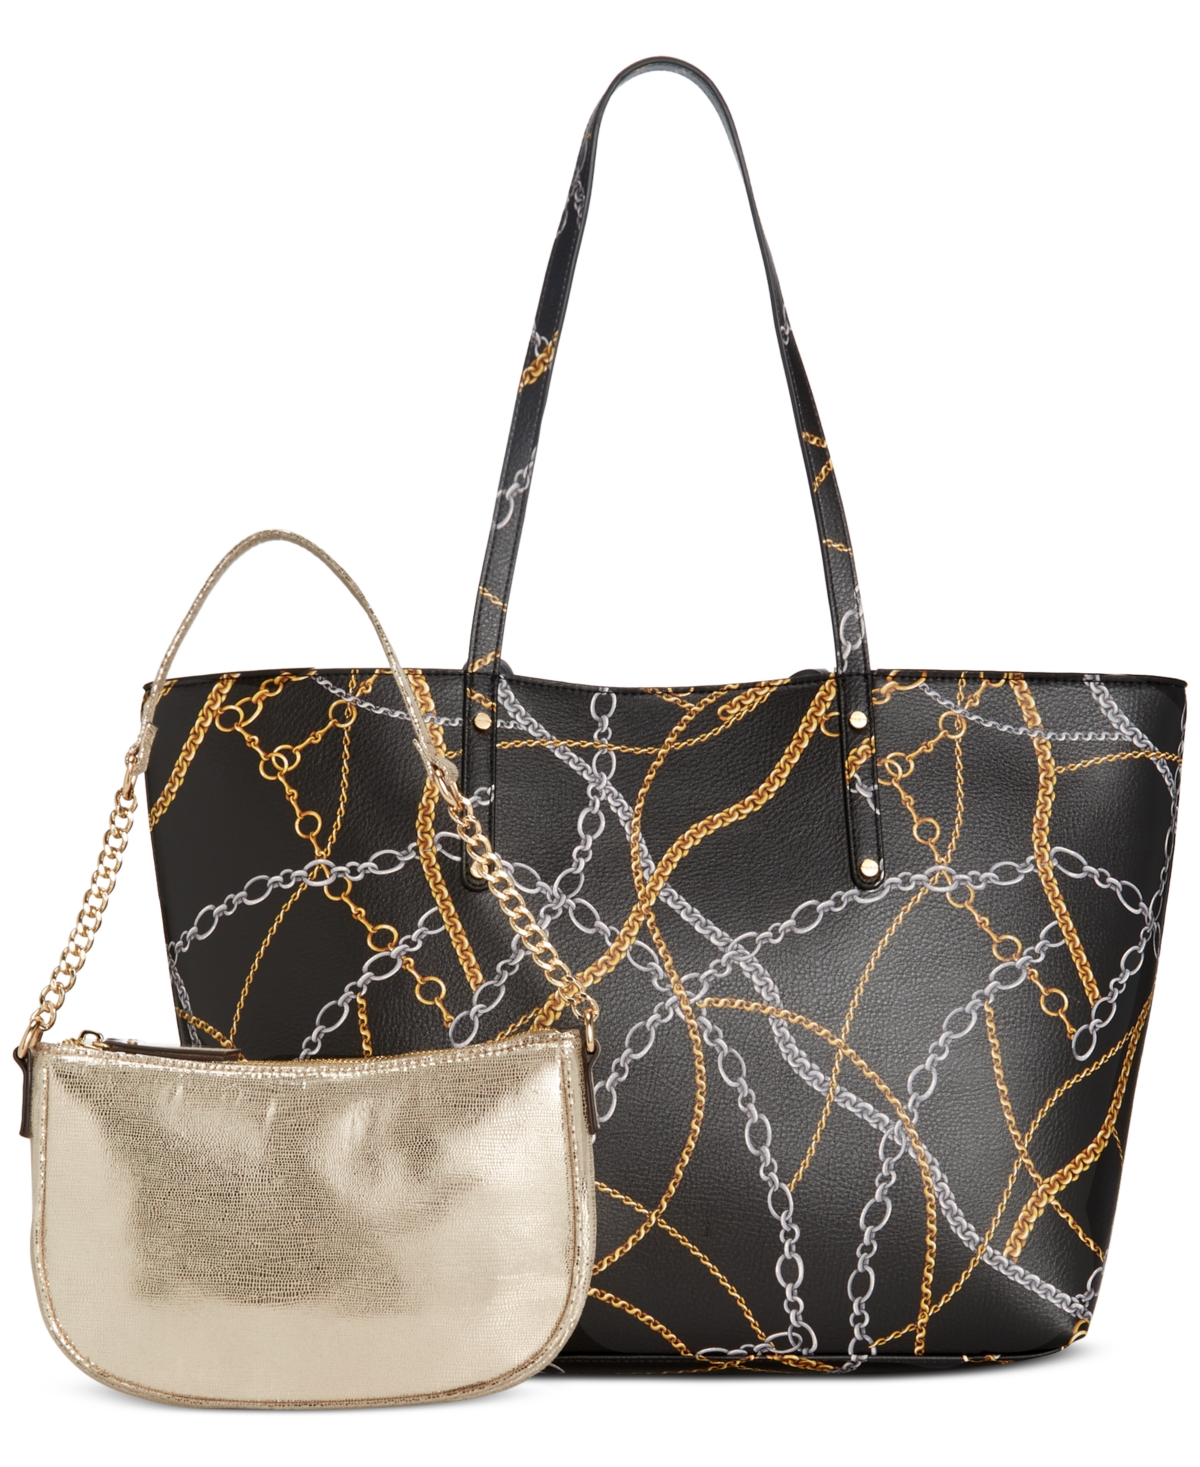 Zoiey 2-1 Tote, Created for Macy's - Black Link/gold